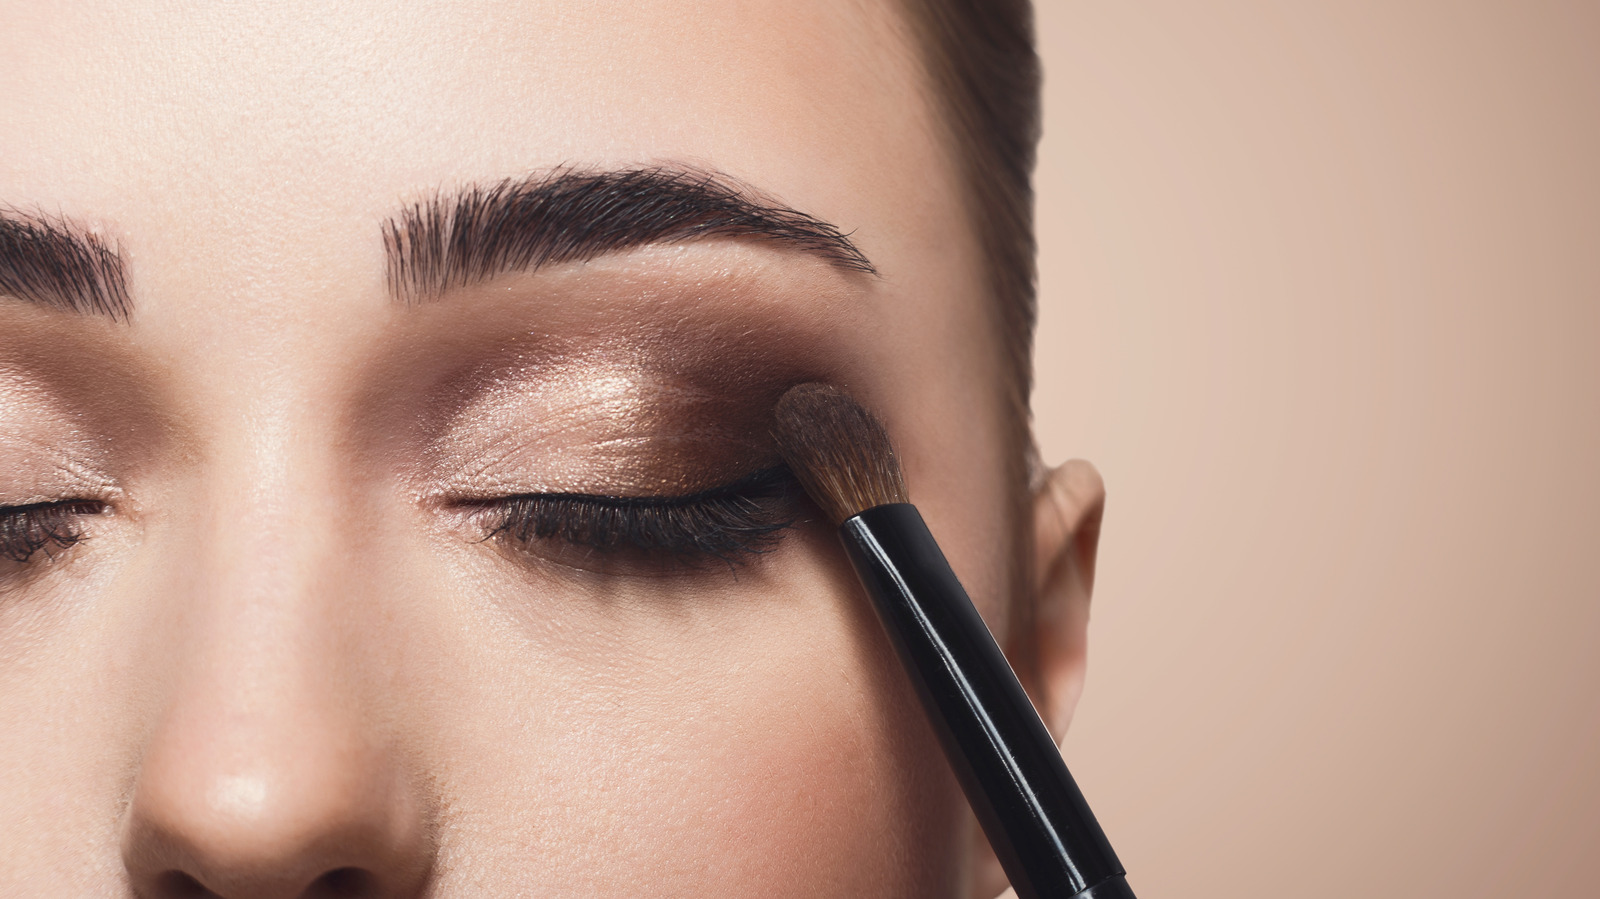 How To Use Eyeshadow To Make Your Eyes Look Bigger